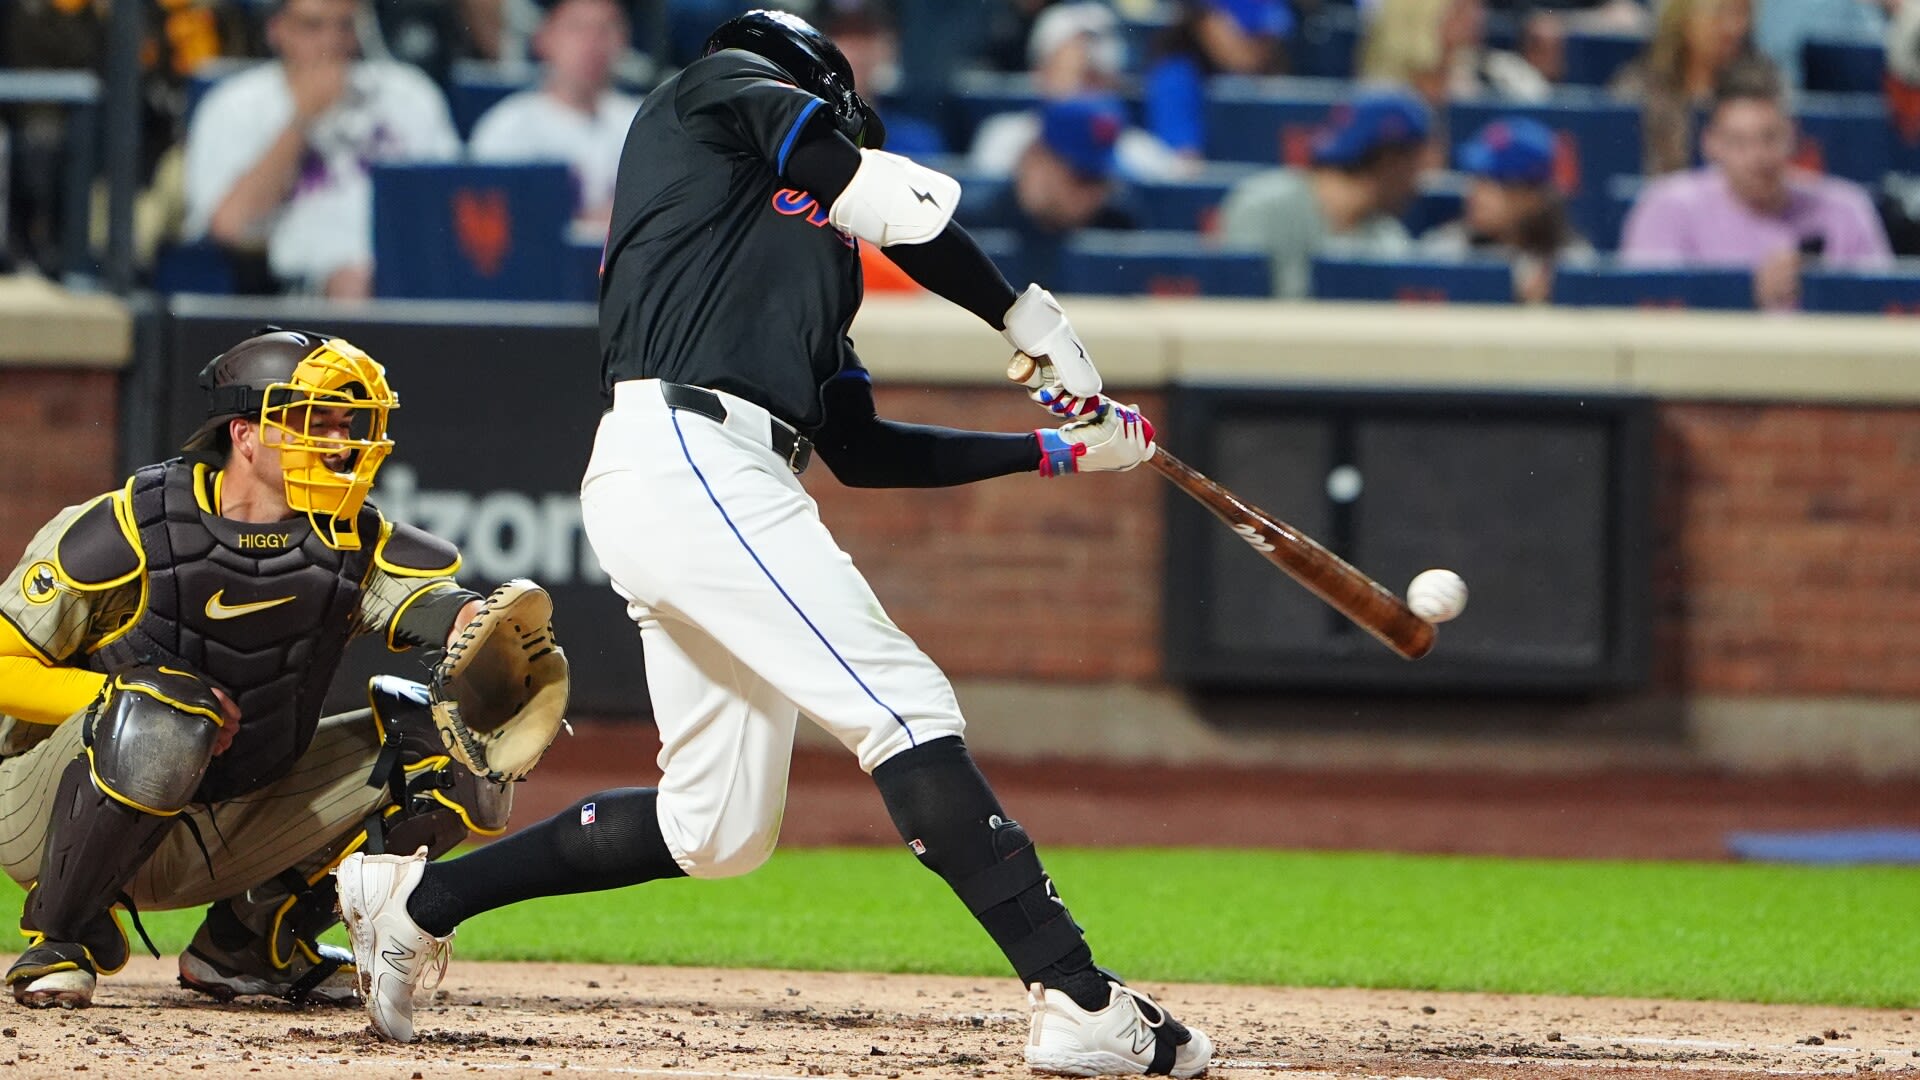 What does Statcast's June bat speed data tell us about surging hitters?